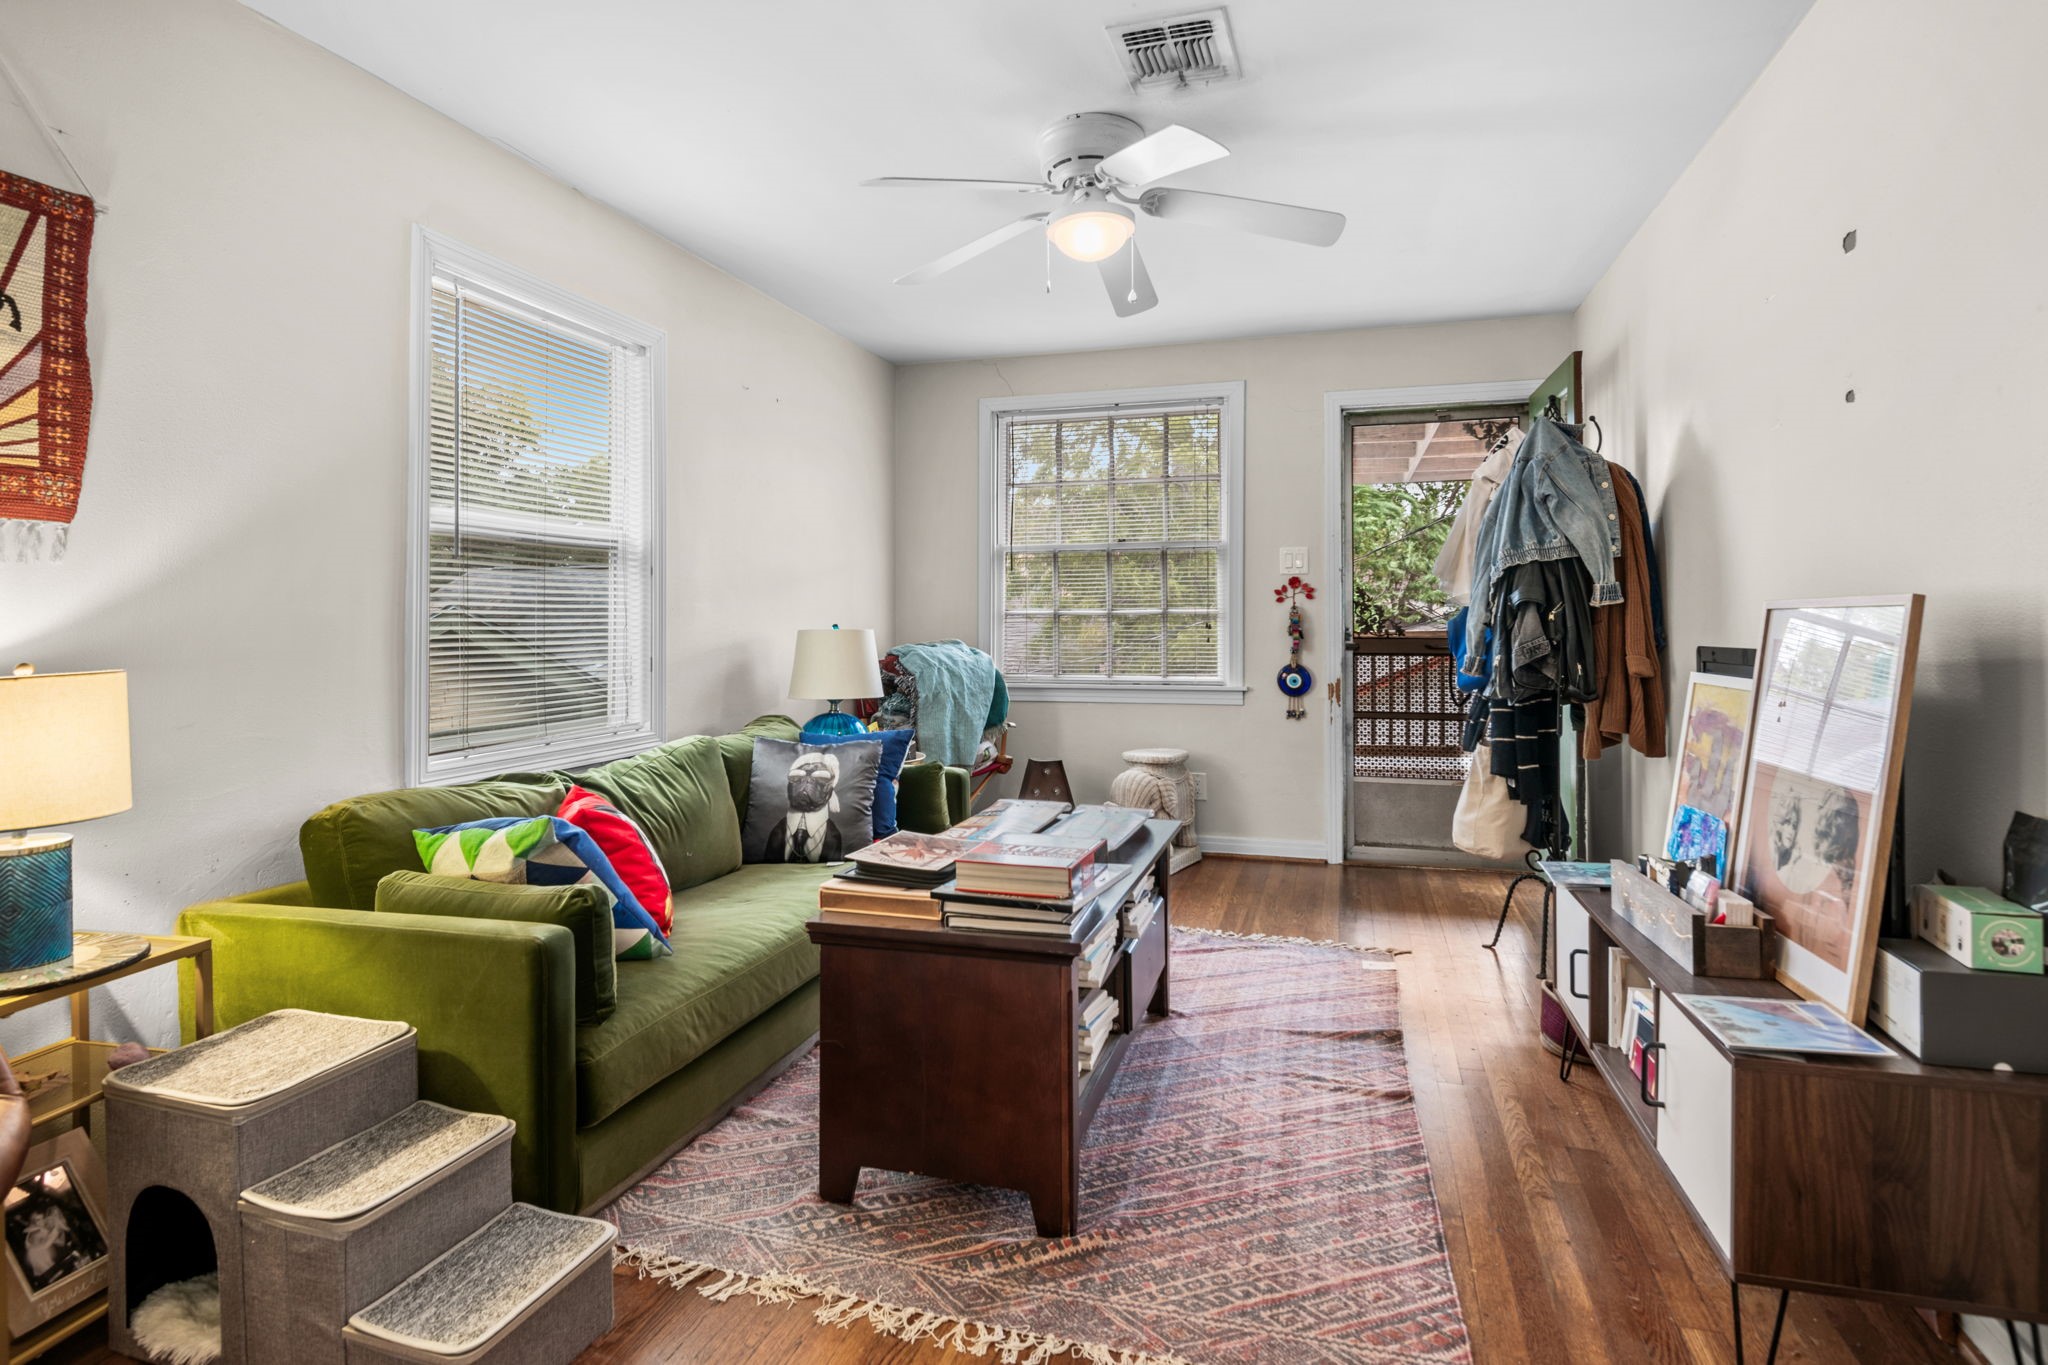 Wood floors run throughout the garage apartment with sunny tree top views from the windows.